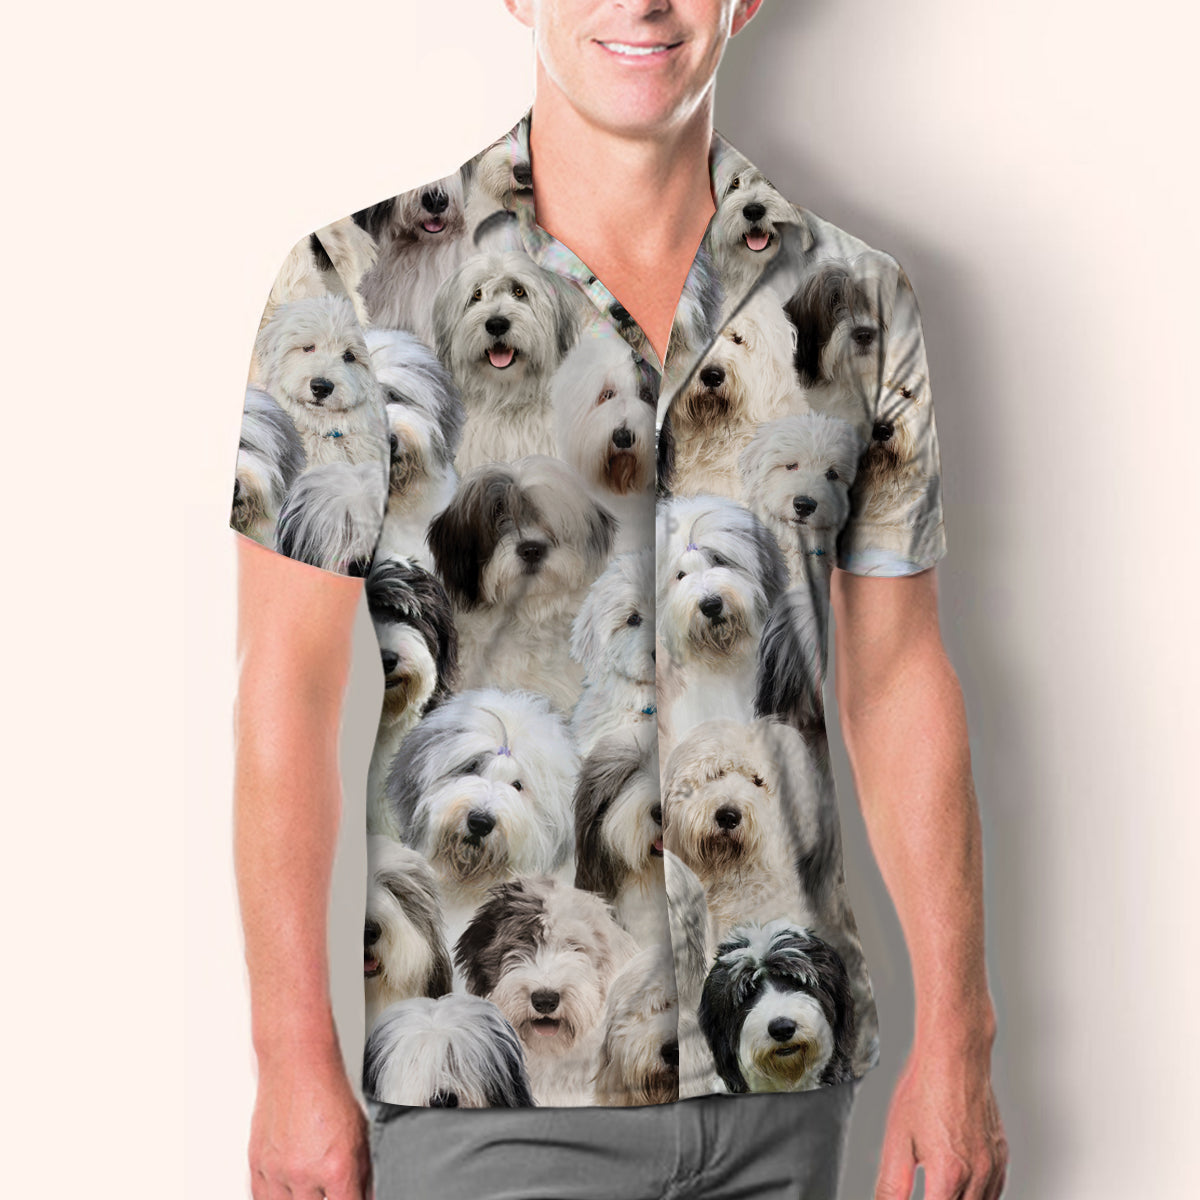 You Will Have A Bunch Of Old English Sheepdogs - Shirt V1